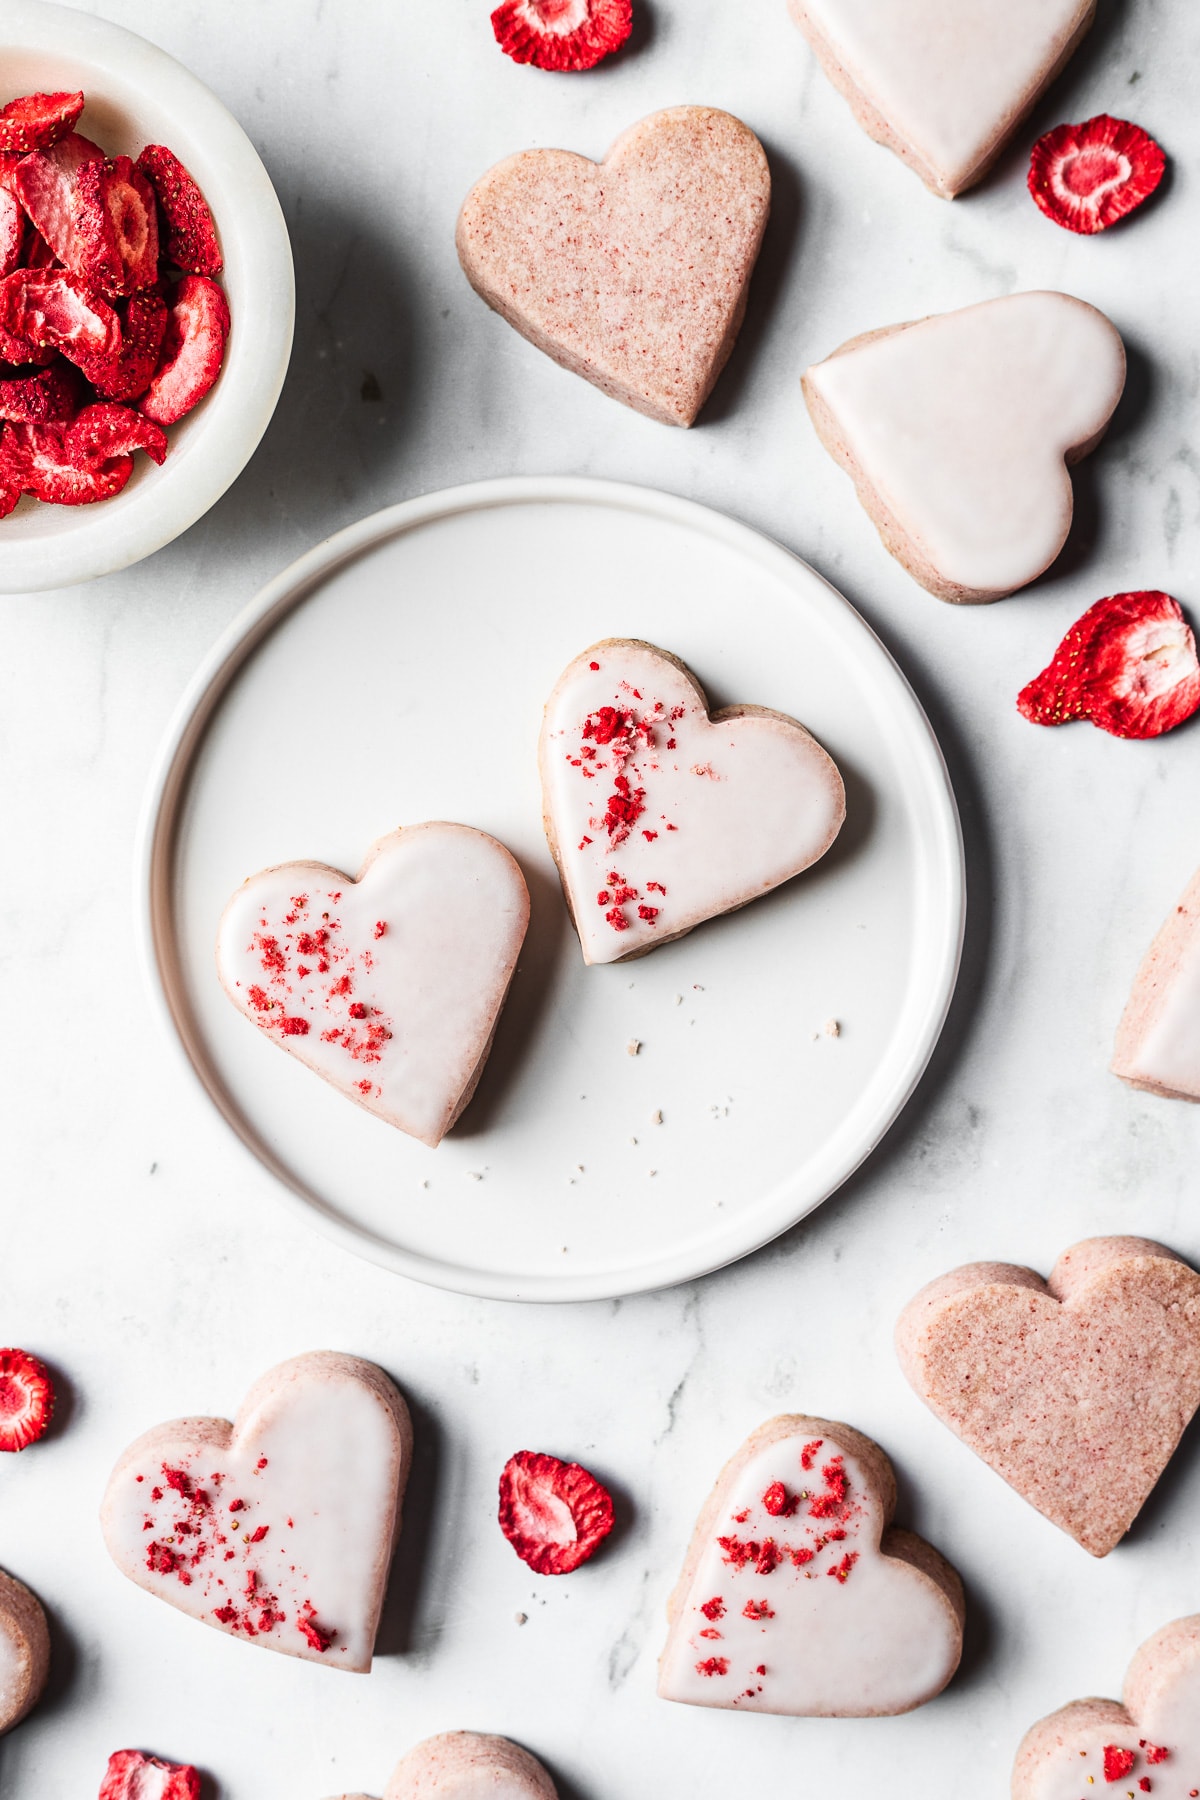 Two glazed heart shaped strawberry shortbread cookies on a white plate on a light grey marble surface, surrounded by more glazed and unglazed cookies. A bowl of freeze dried strawberries is at top left. Some of the cookies have been dipped in white glaze and sprinkled with red freeze dried strawberries.